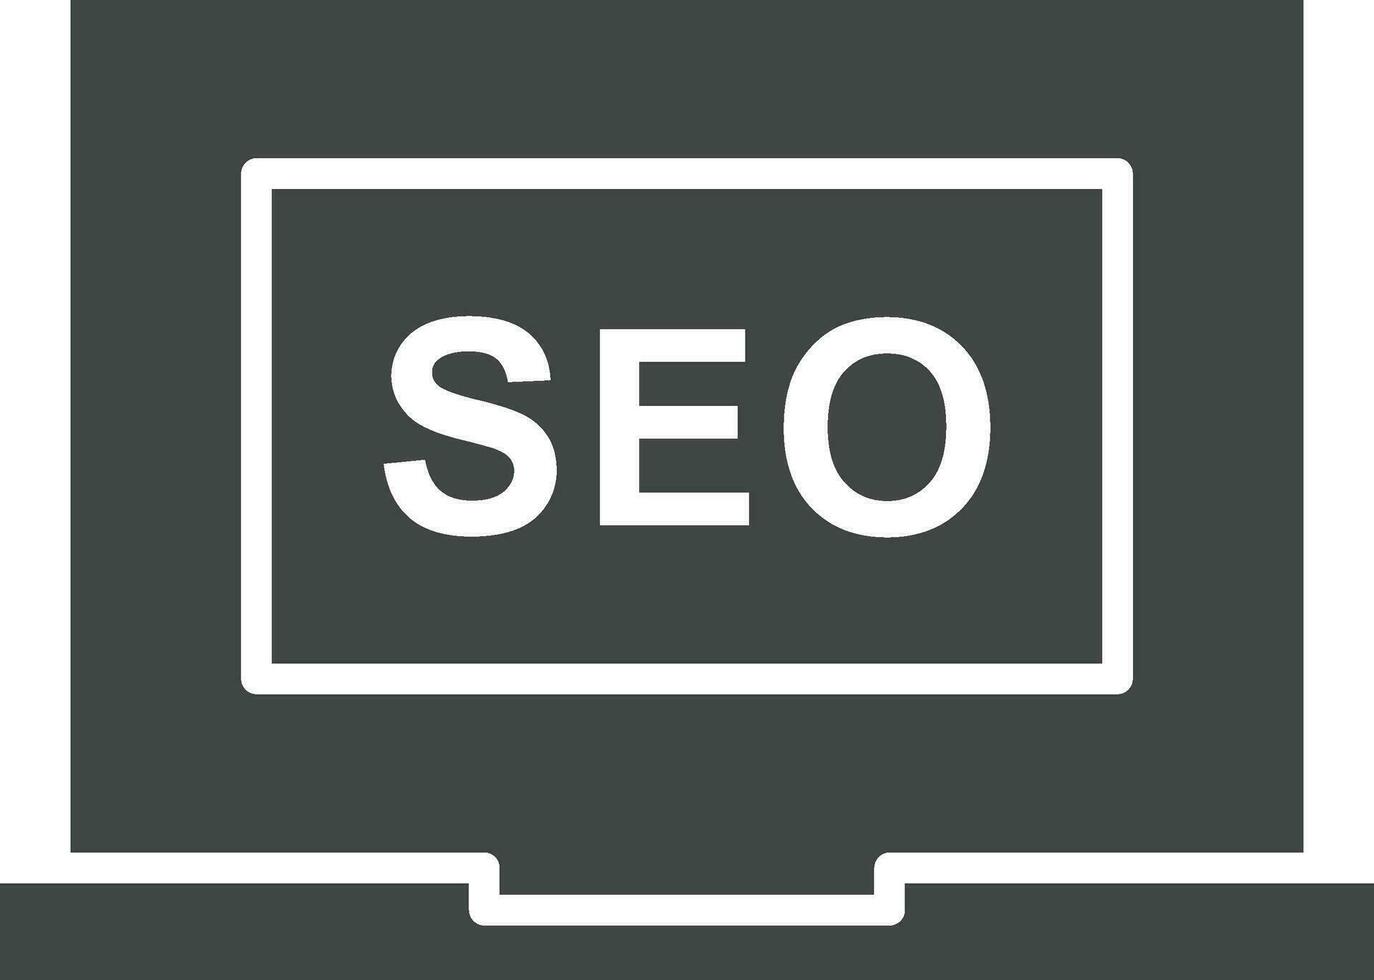 SEO icon vector image. Suitable for mobile apps, web apps and print media.